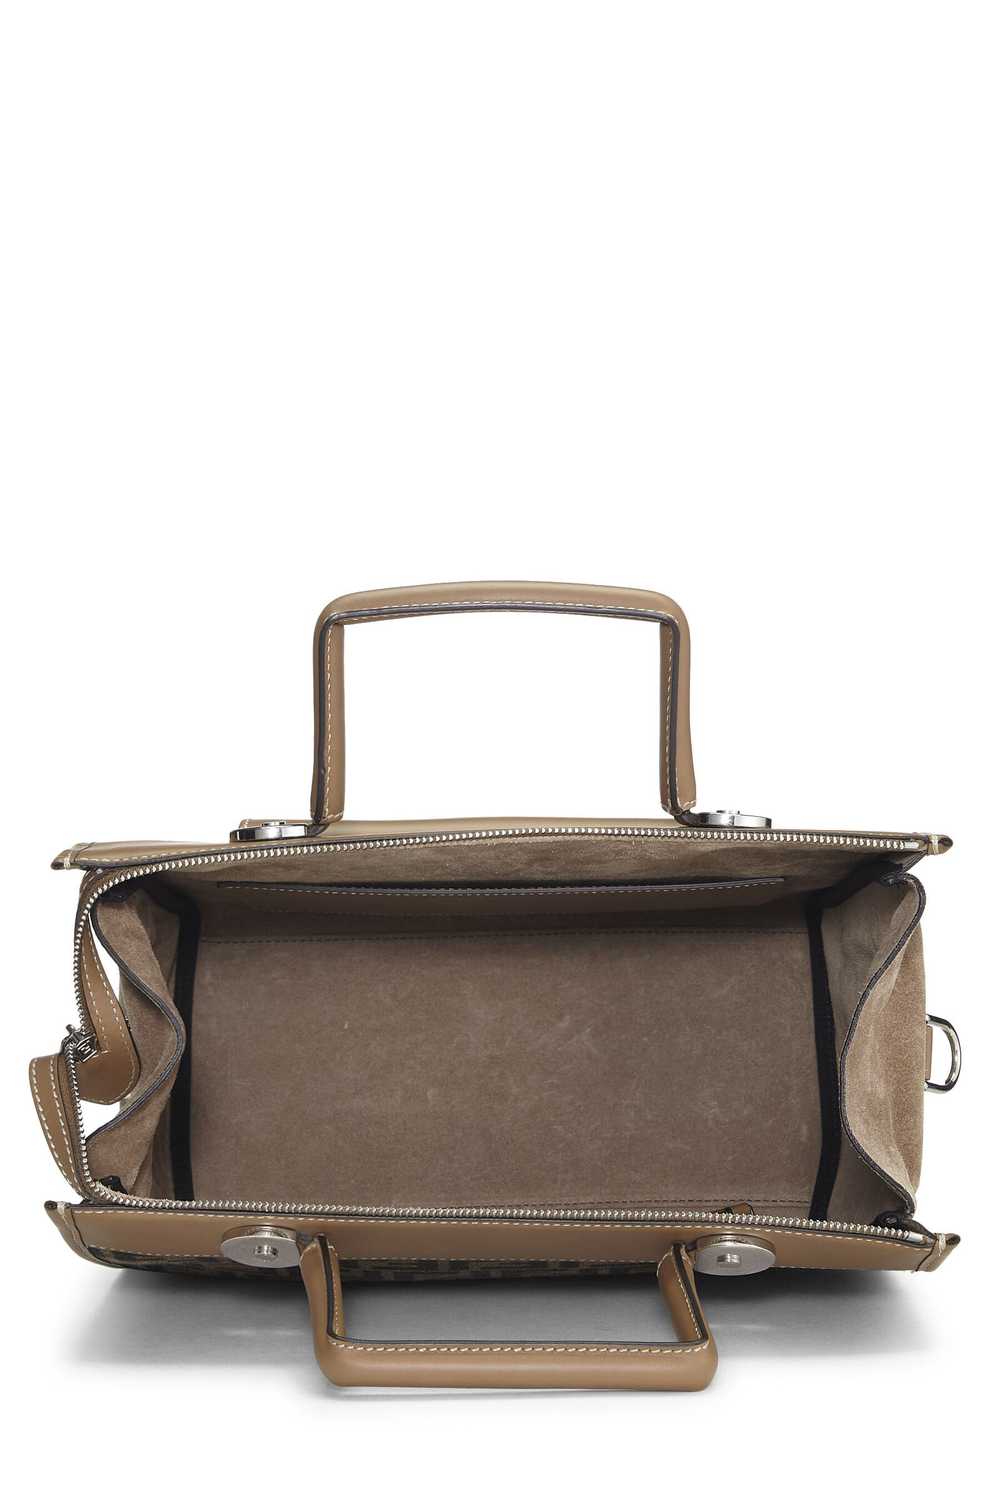 Brown Zucca Leather Soft Trunk Handle Bag - image 6